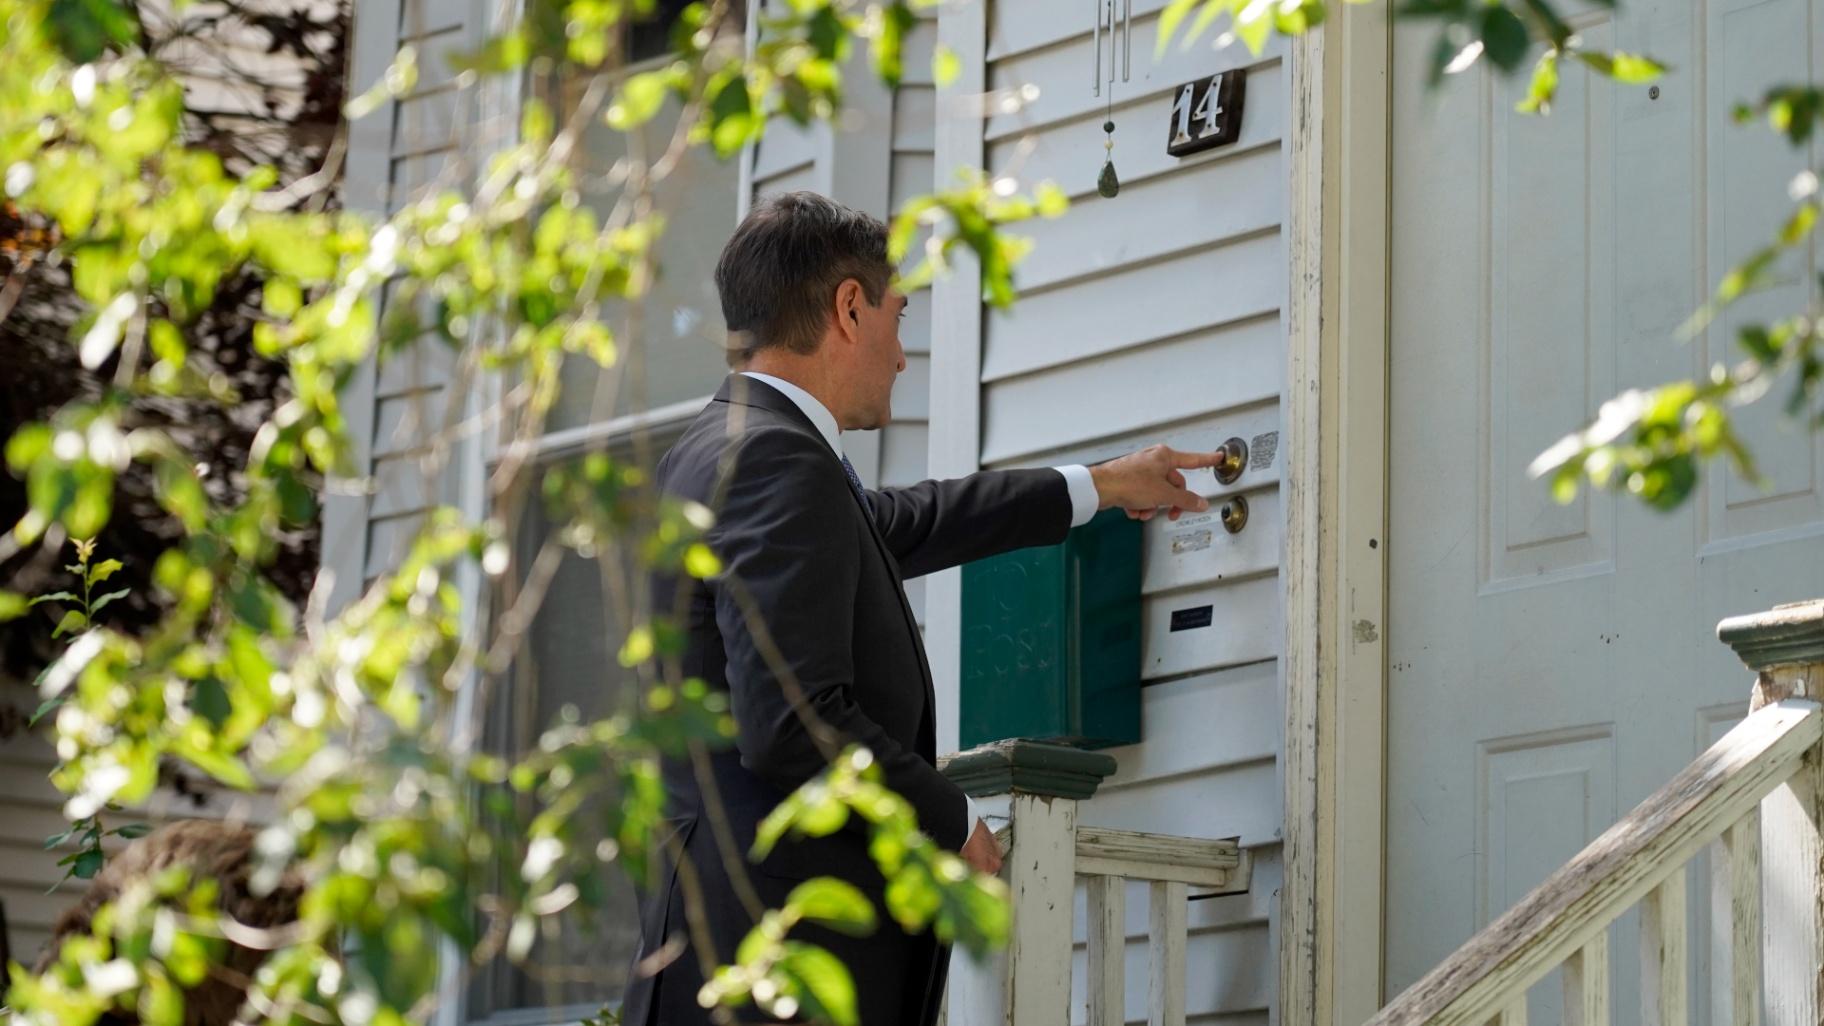 Dan Sideris, of Newton, Mass., rings a doorbell of a home as he and his wife return to door-to-door visits as Jehovah’s Witnesses, Thursday, Sept. 1, 2022, in Boston. (AP Photo / Mary Schwalm)